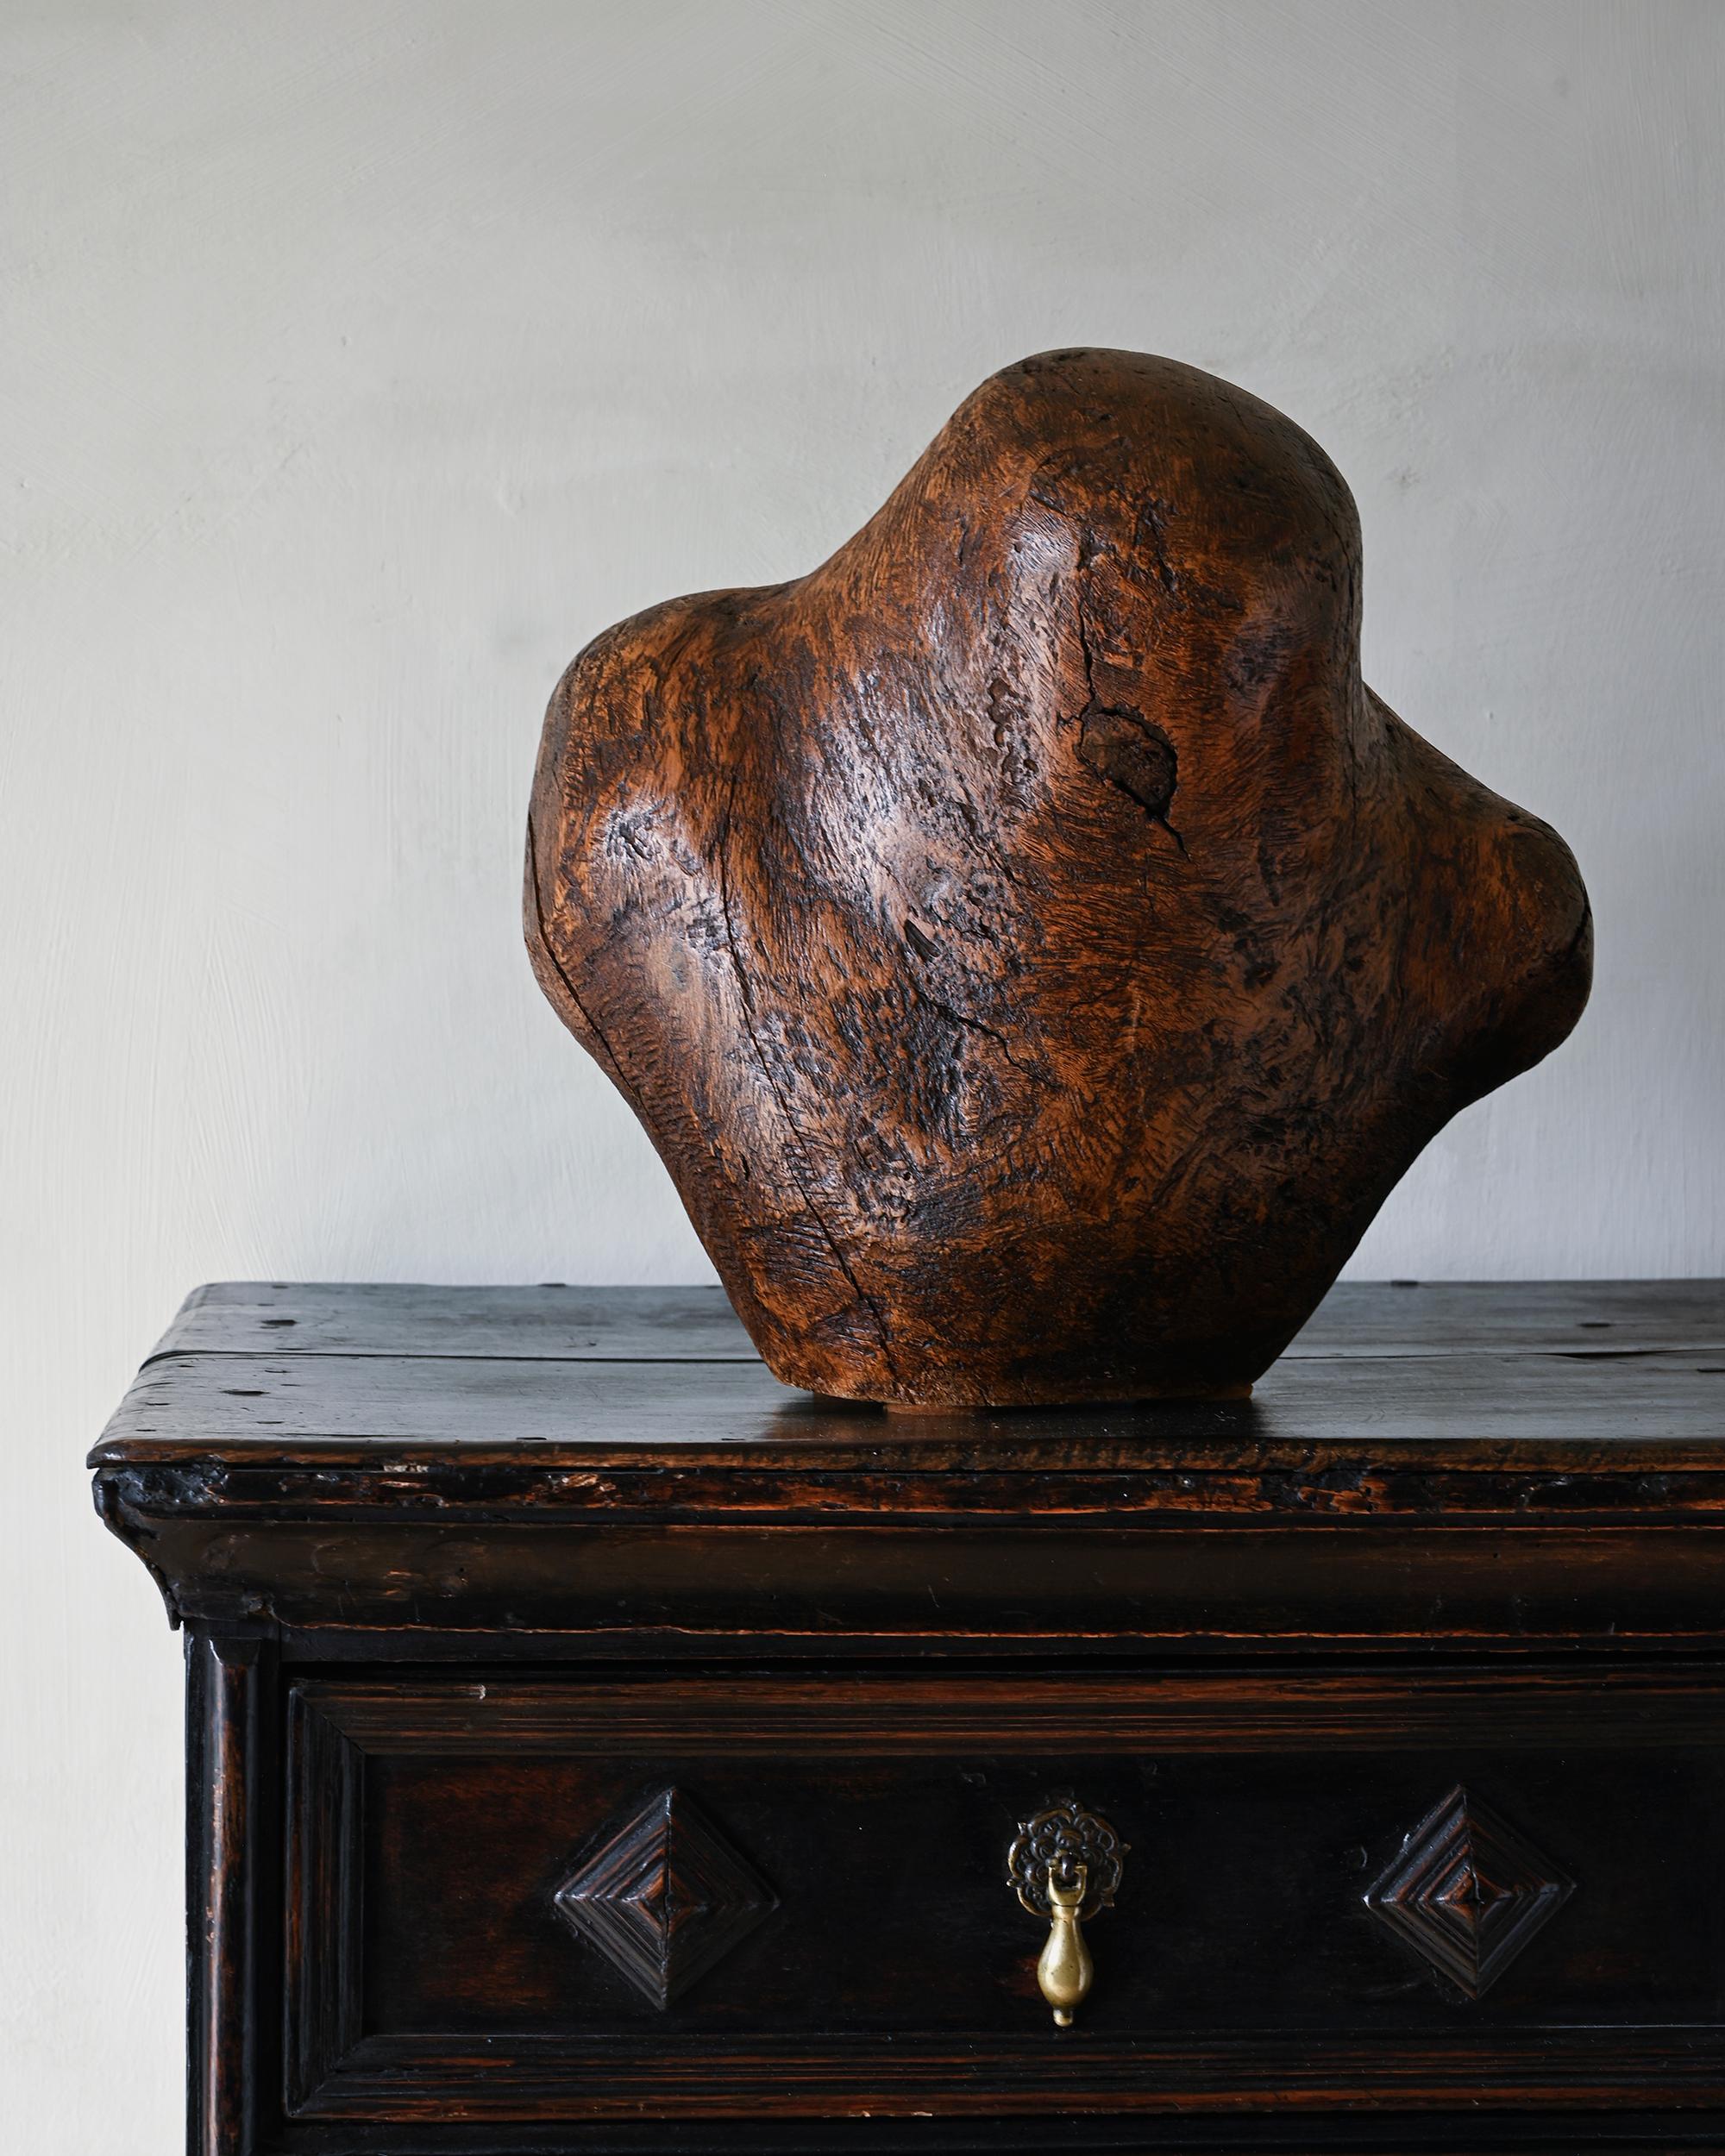 Sculptural organic solid wood bust, carved form a tree with an fantastic expression and patina, circa 1990, Denmark, unknown Artist.